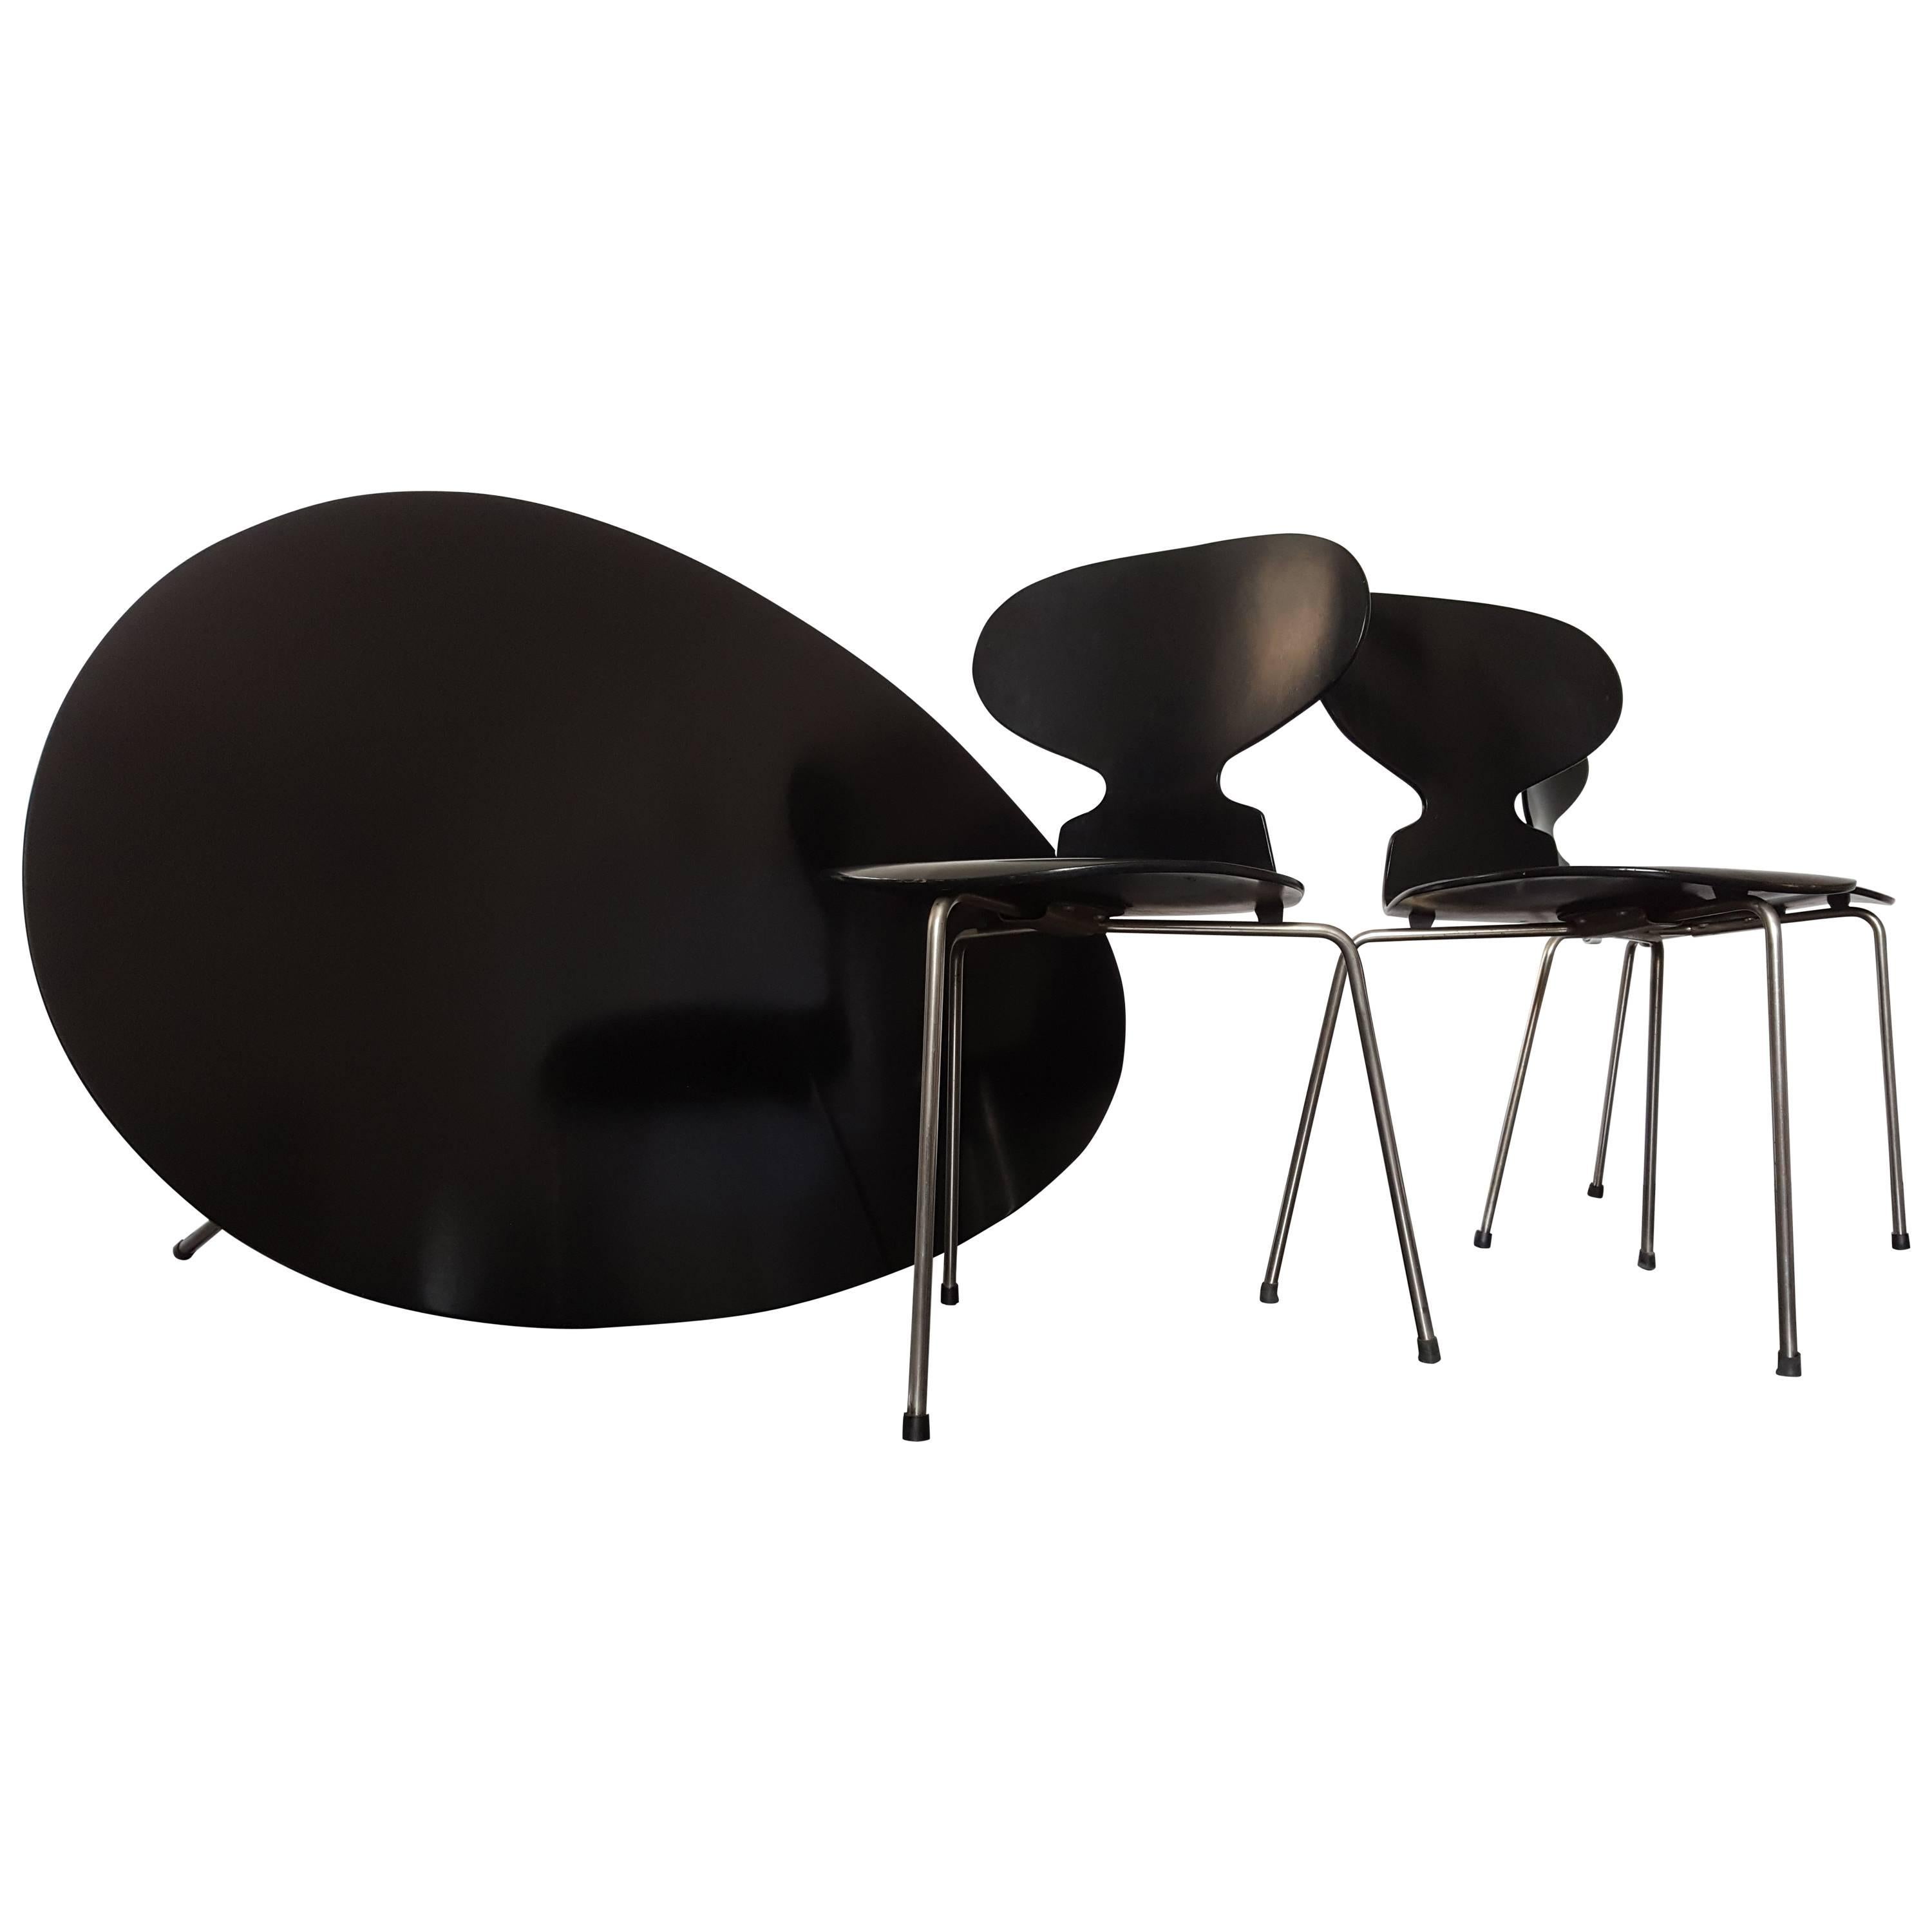 Arne Jacobsen Egg Table and Four "Ant" Chairs for Fritz Hansen